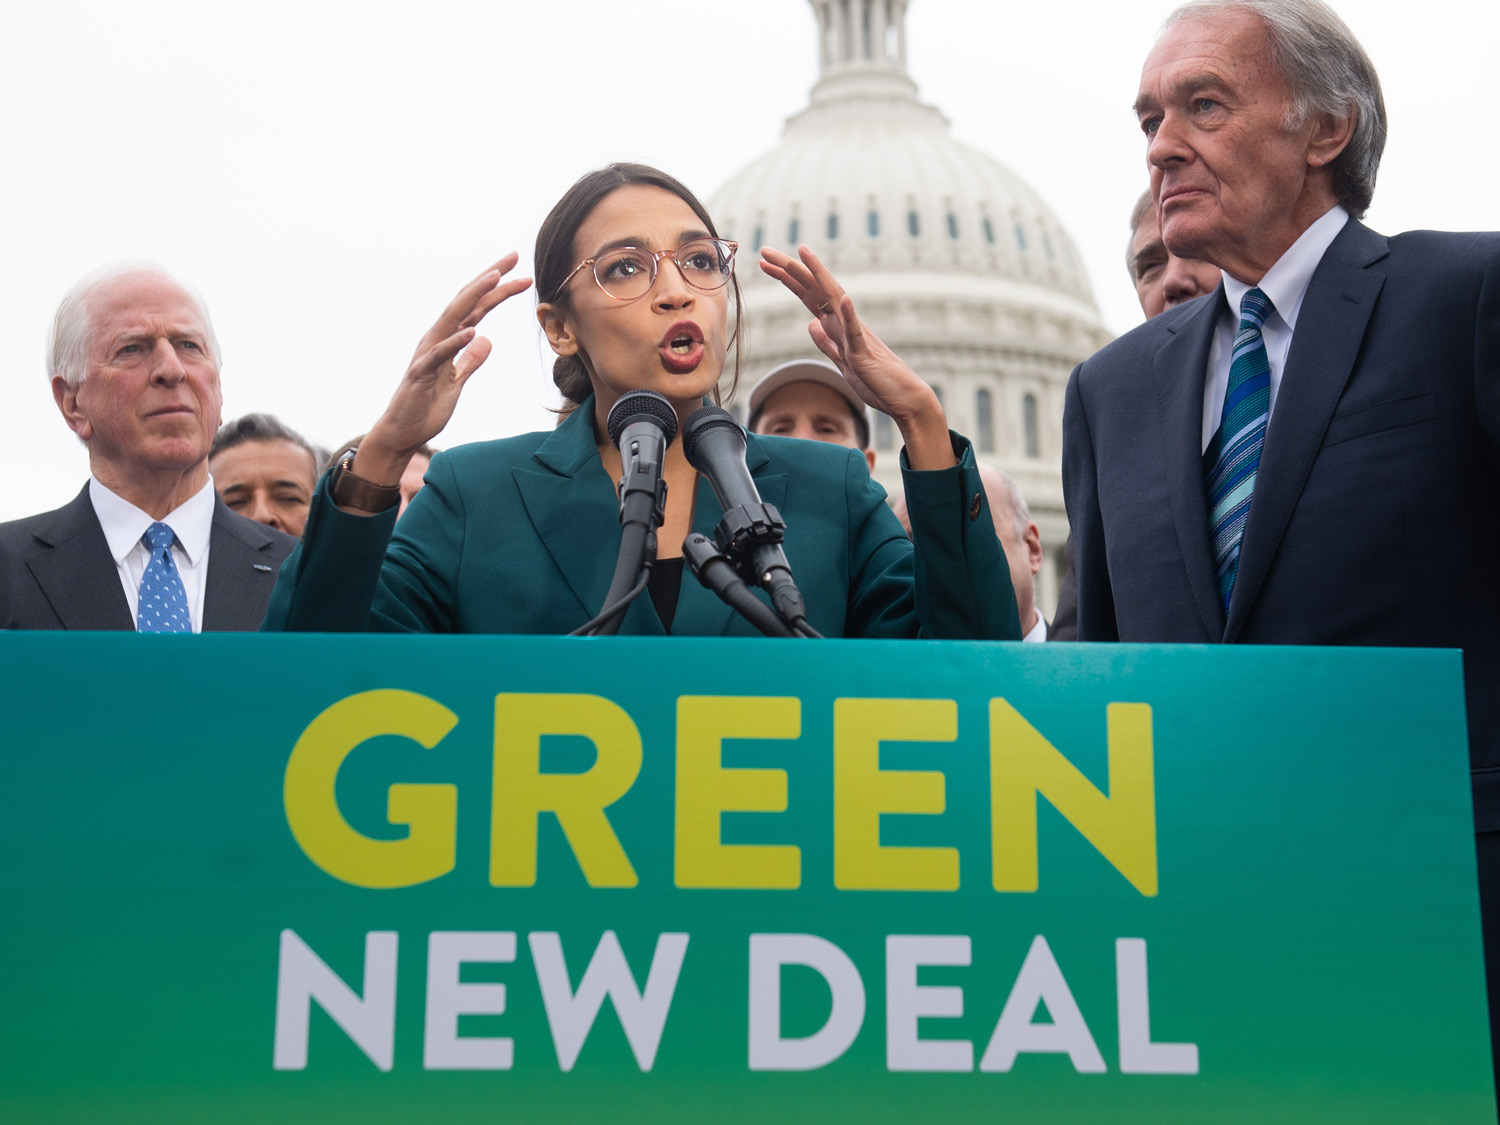 AOC Blasts GOP For Caring More About Their Anti-Trans Agenda Than